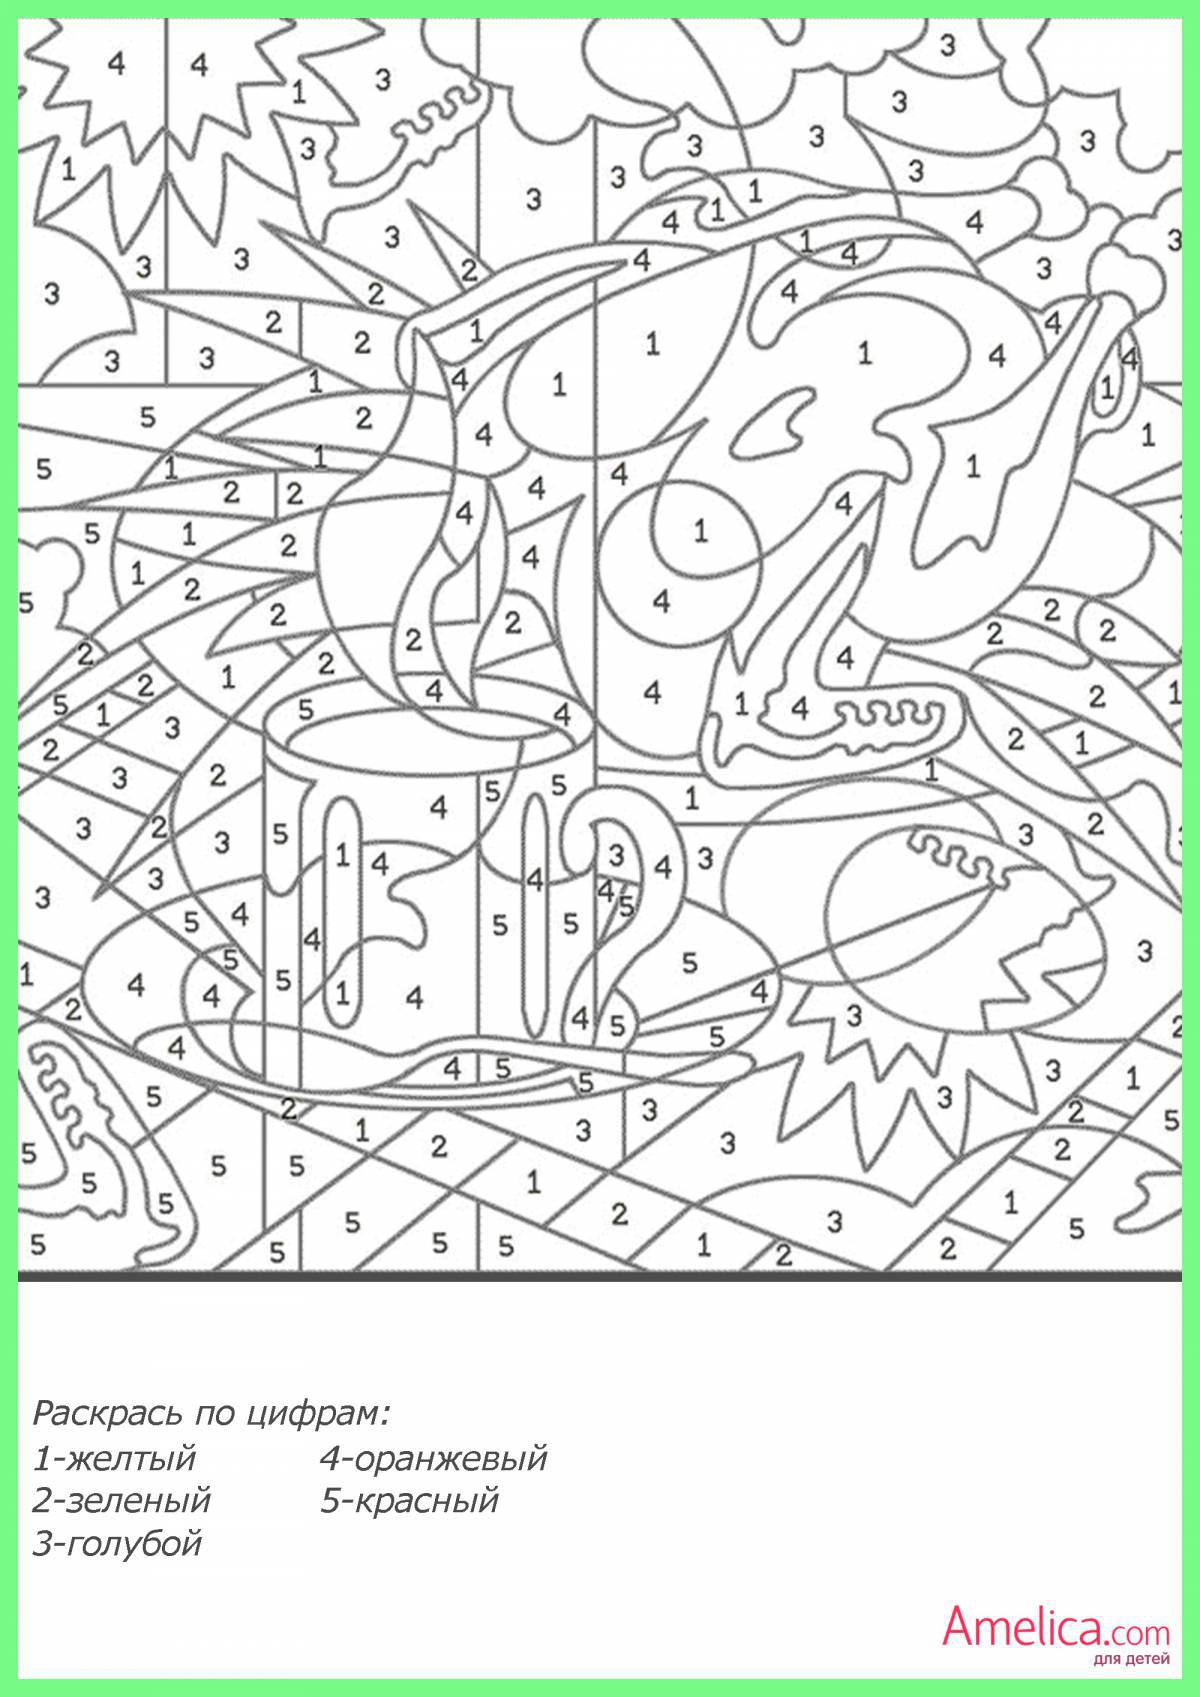 Fun coloring by numbers for children 6-7 years old